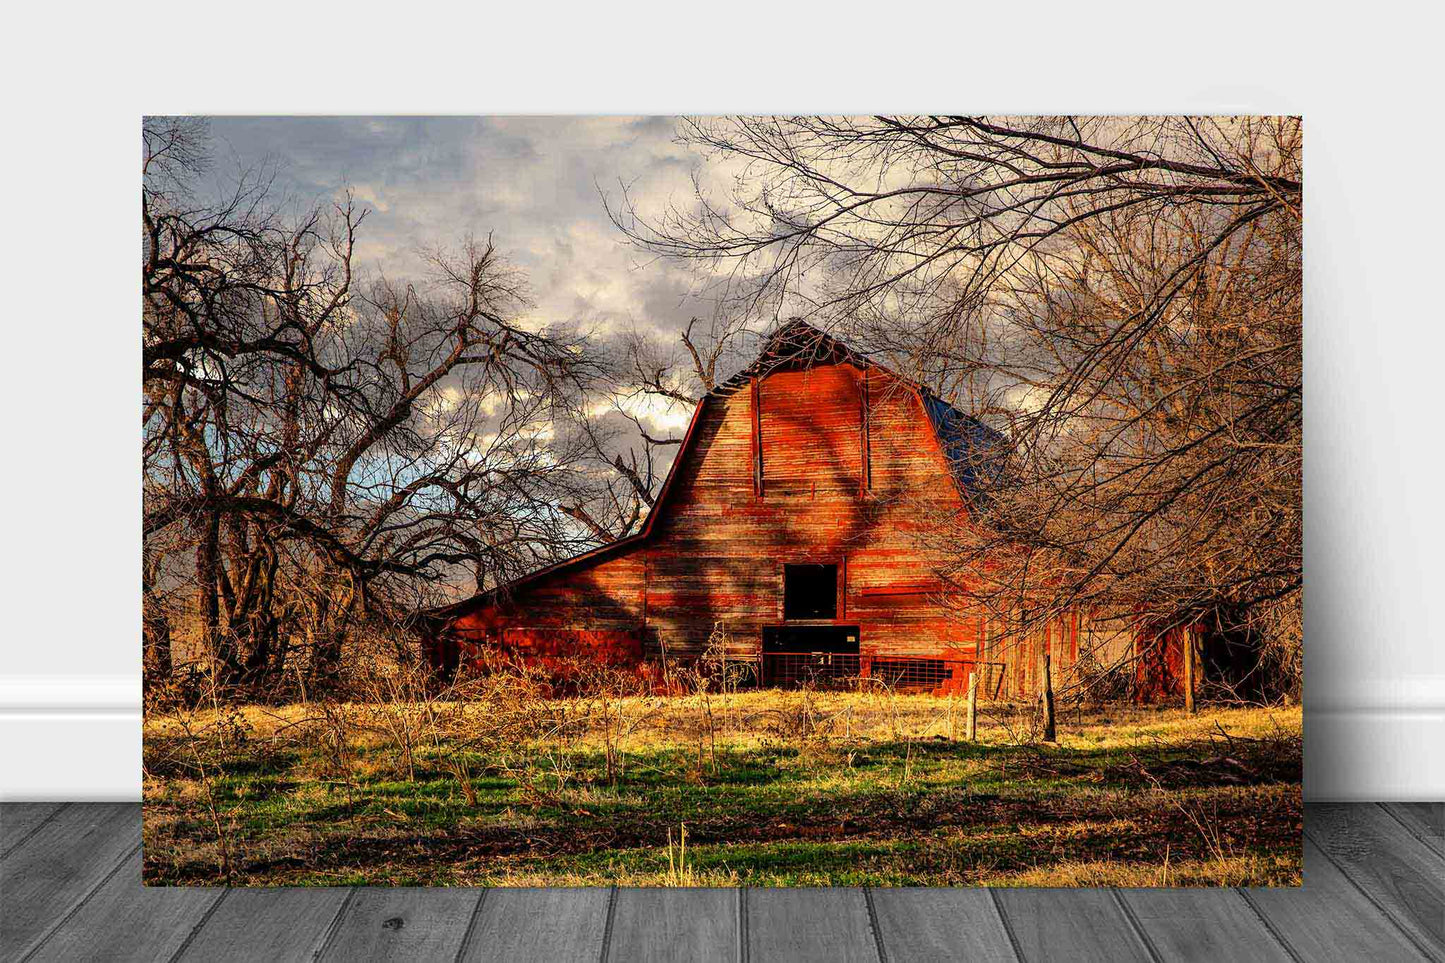 Country wall art metal print of a rustic red barn sitting in the shadows of leafless trees on an autumn evening in Oklahoma by Sean Ramsey of Southern Plains Photography.